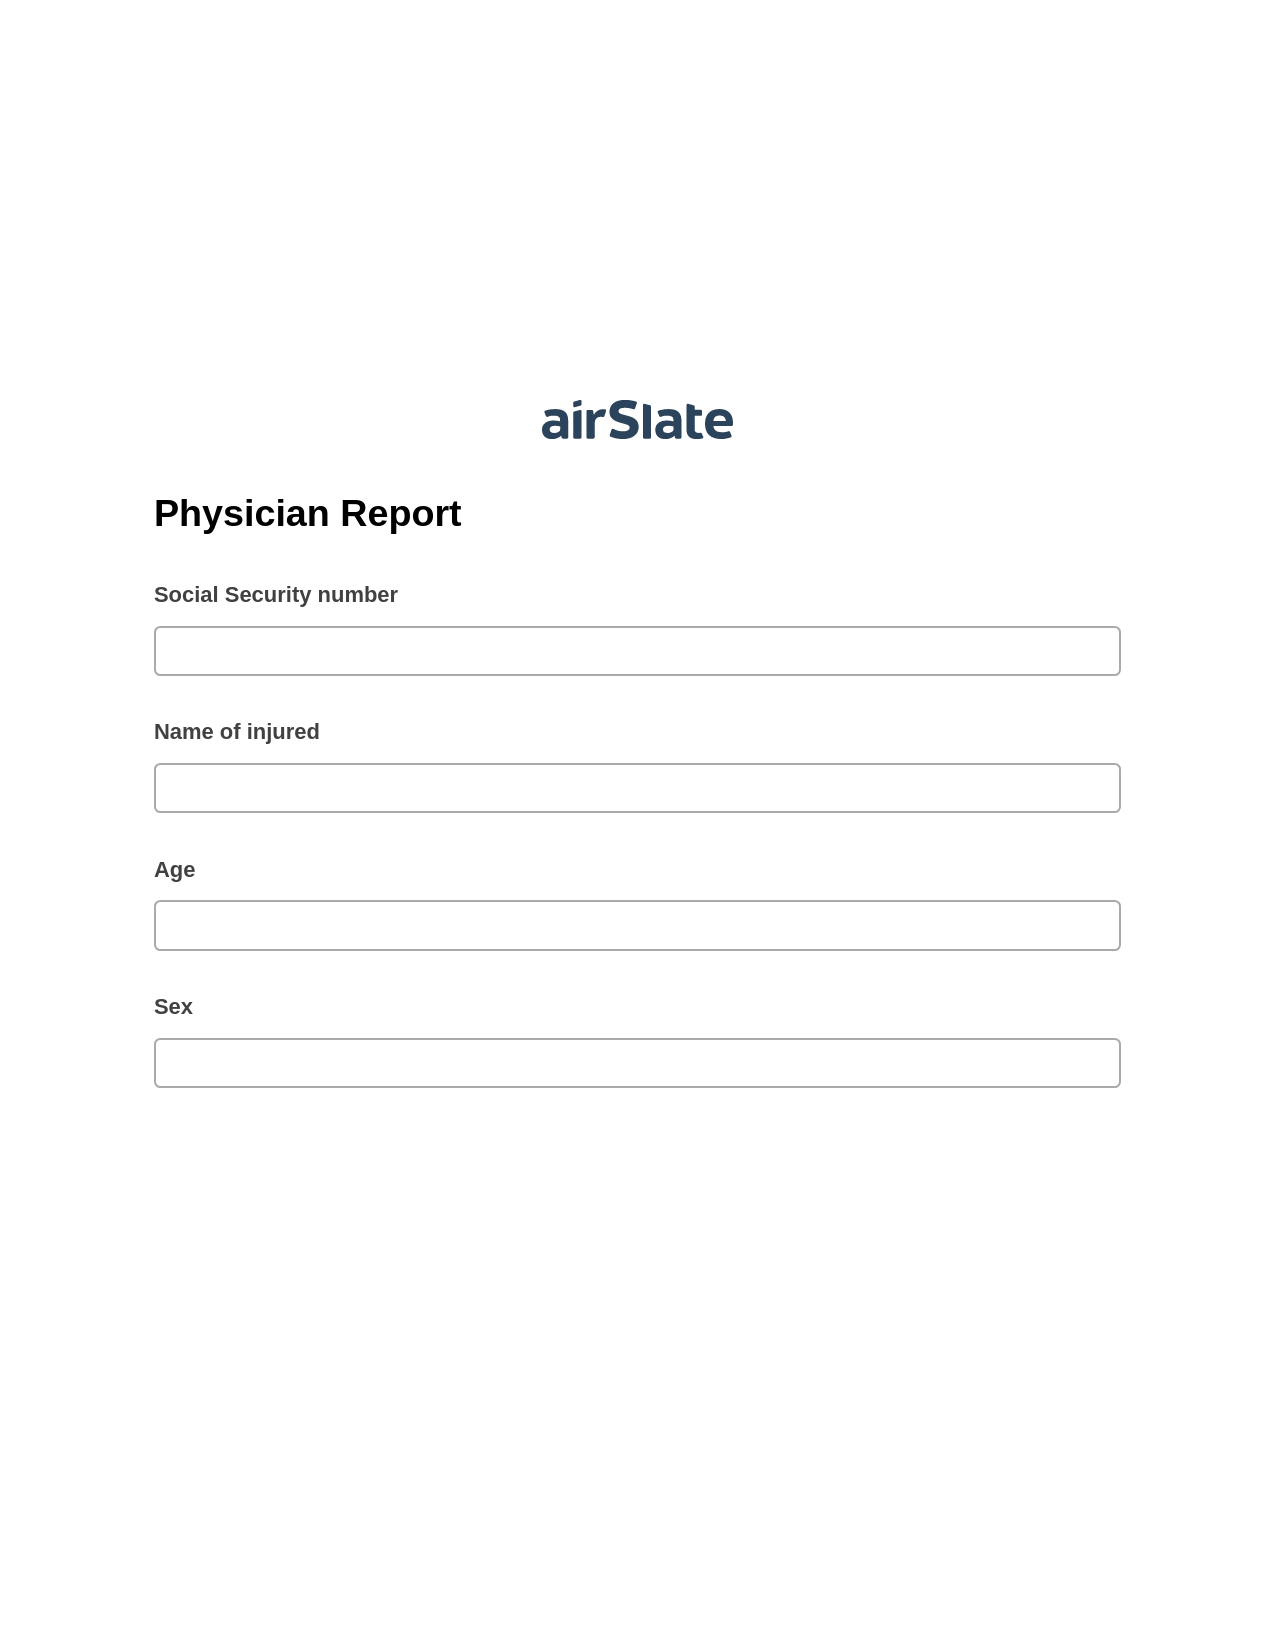 Multirole Physician Report Pre-fill from Salesforce Records Bot, Create NetSuite Record bot, Export to WebMerge Bot